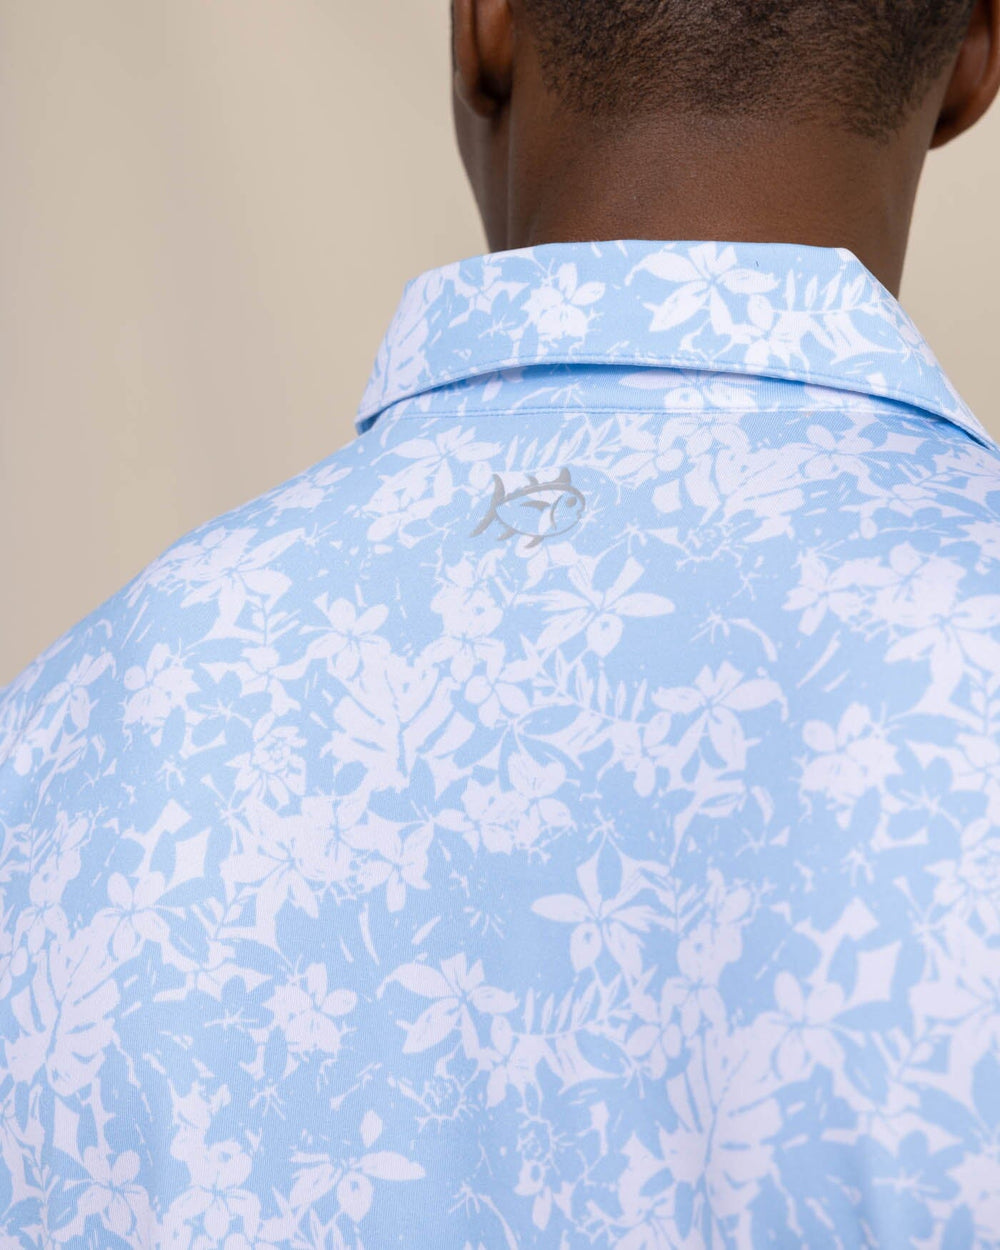 The detail view of the Southern Tide Driver Island Blooms Printed Polo by Southern Tide - Clearwater Blue